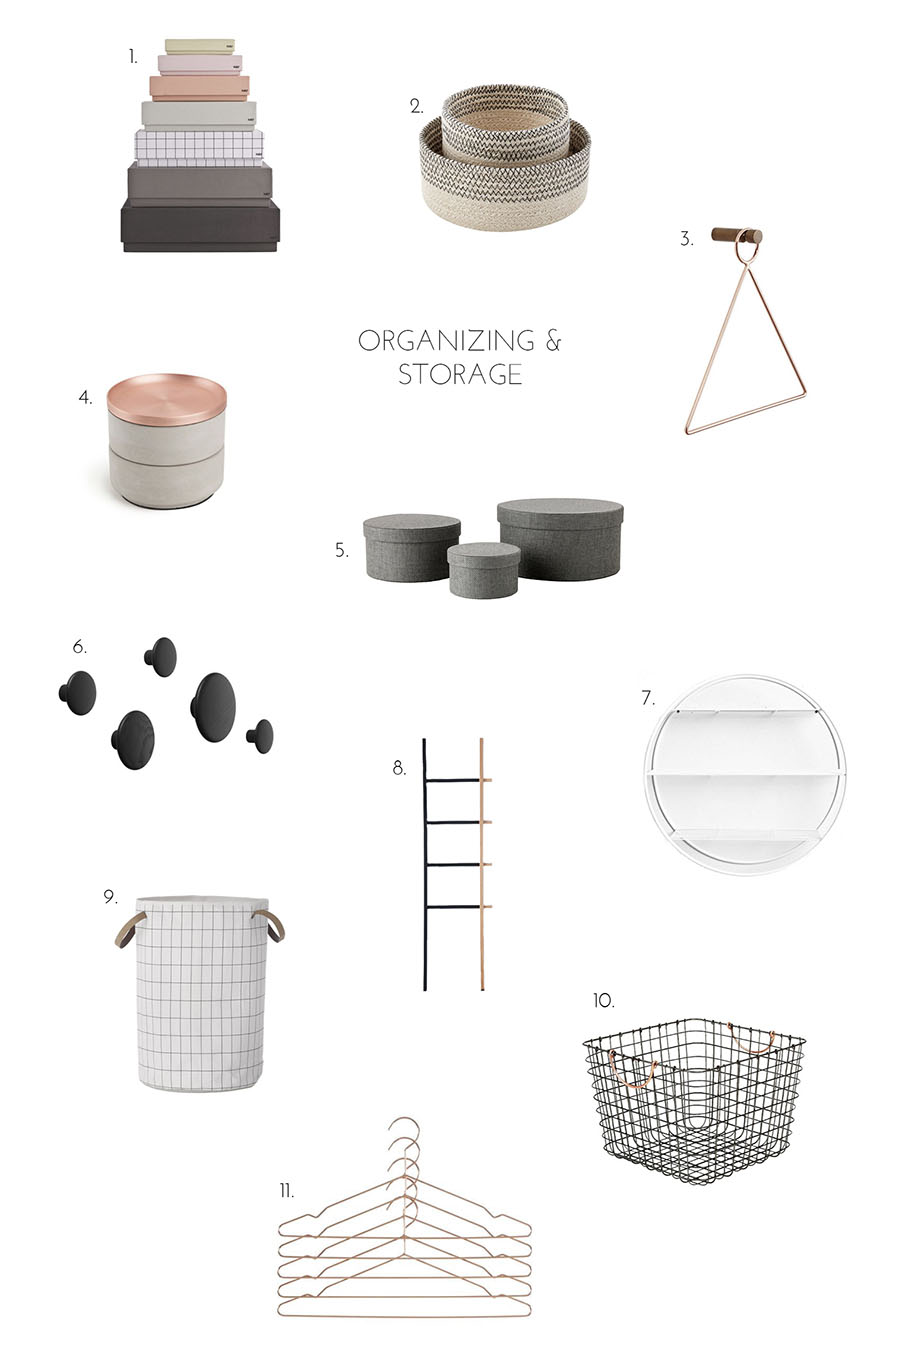 Organizing and storage accessories